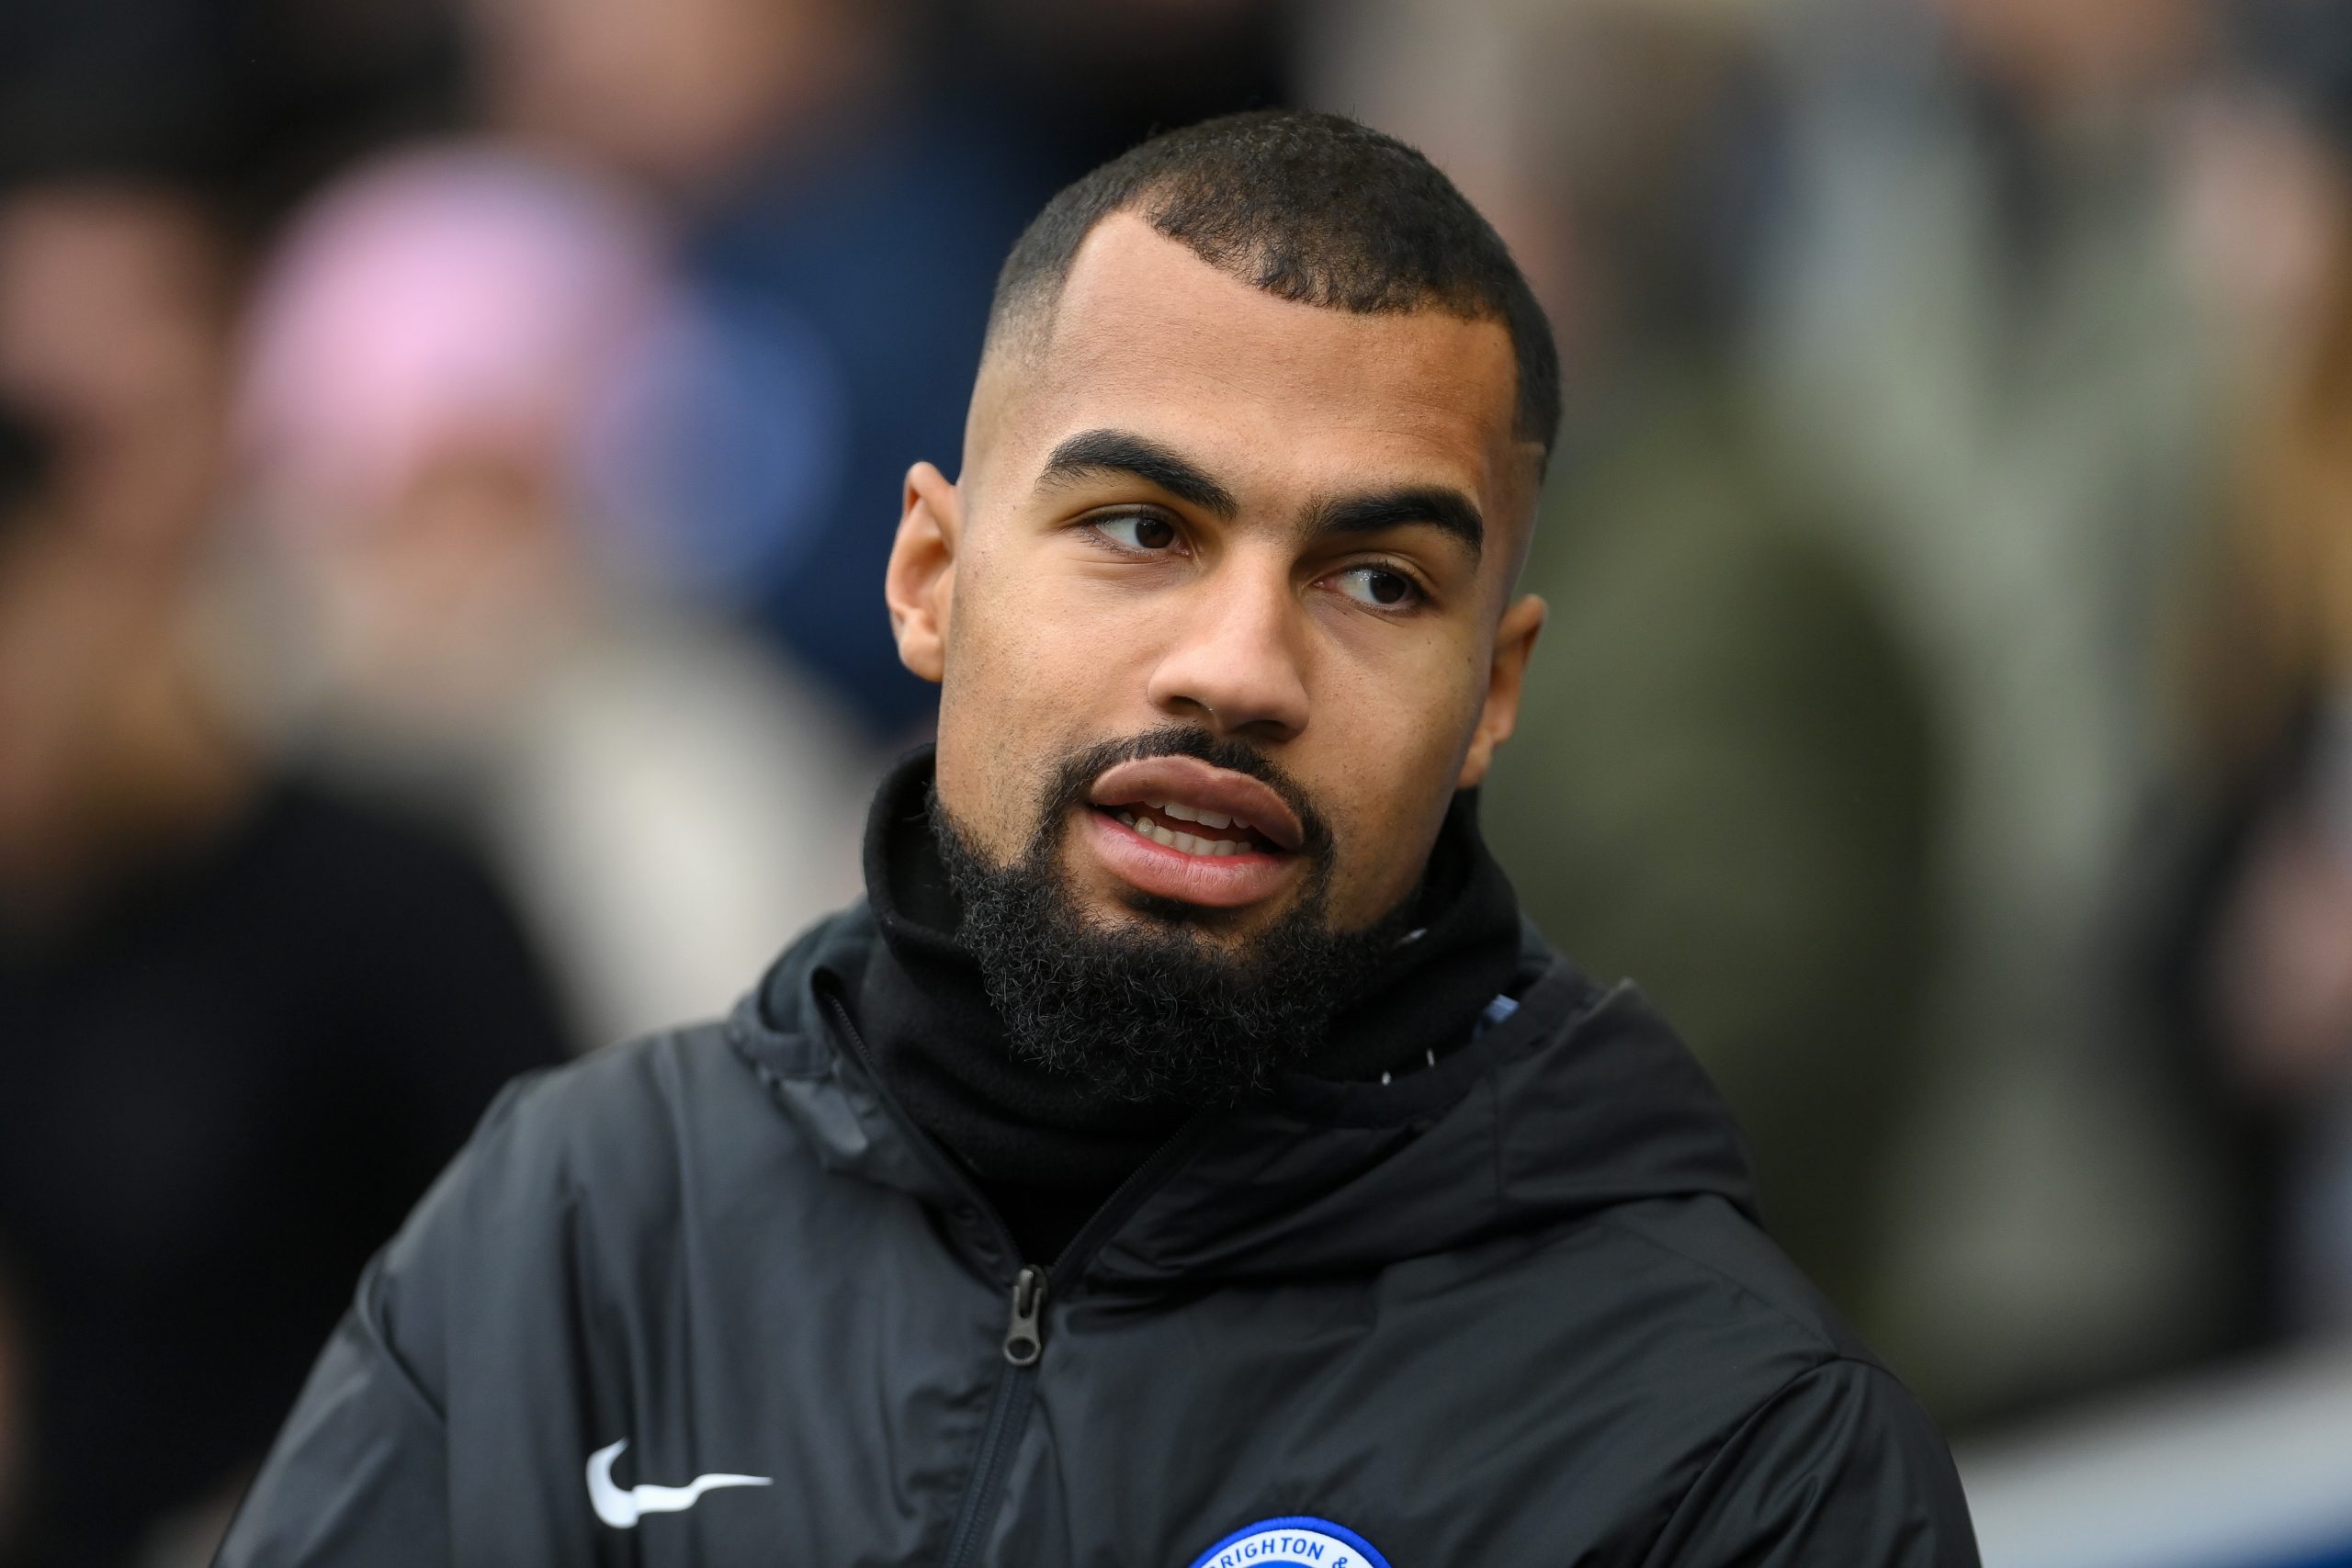 Brighton and Hove Albion shot-stopper Robert Sanchez 'free to leave' amidst Tottenham Hotspur links.